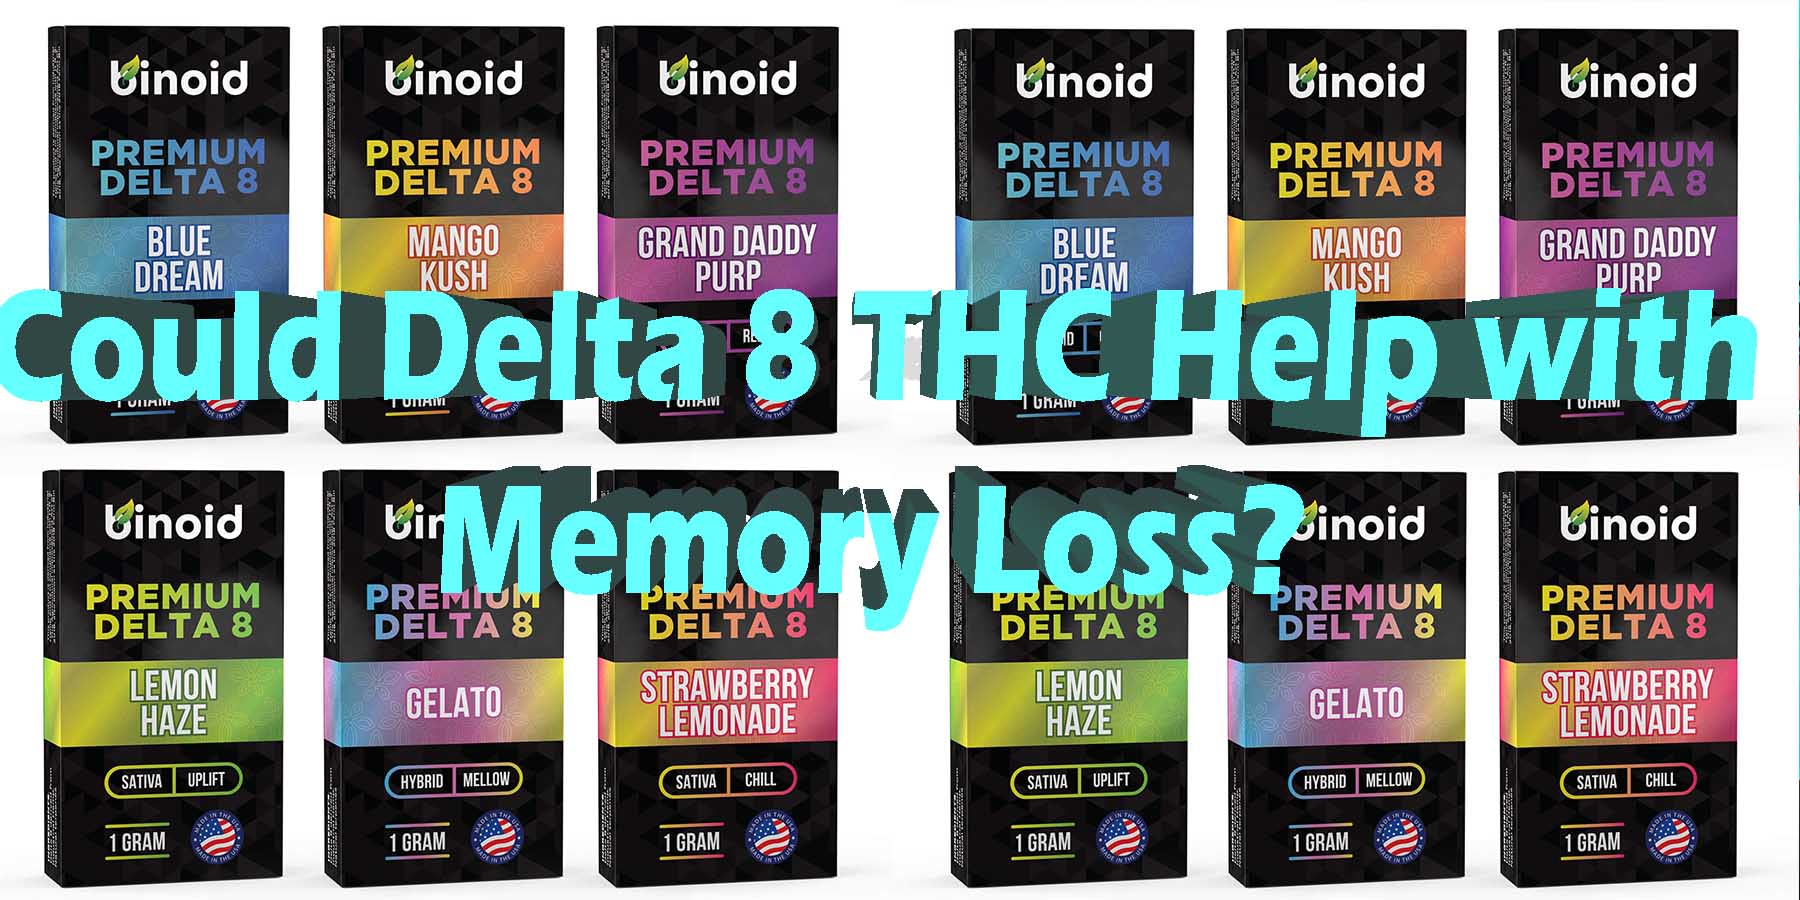 Could Delta 8 THC Help with Memory Loss LowestPrice Coupon Discount For Smoking Best High Smoke Shop Online Near Me StrongestBrand Binoid